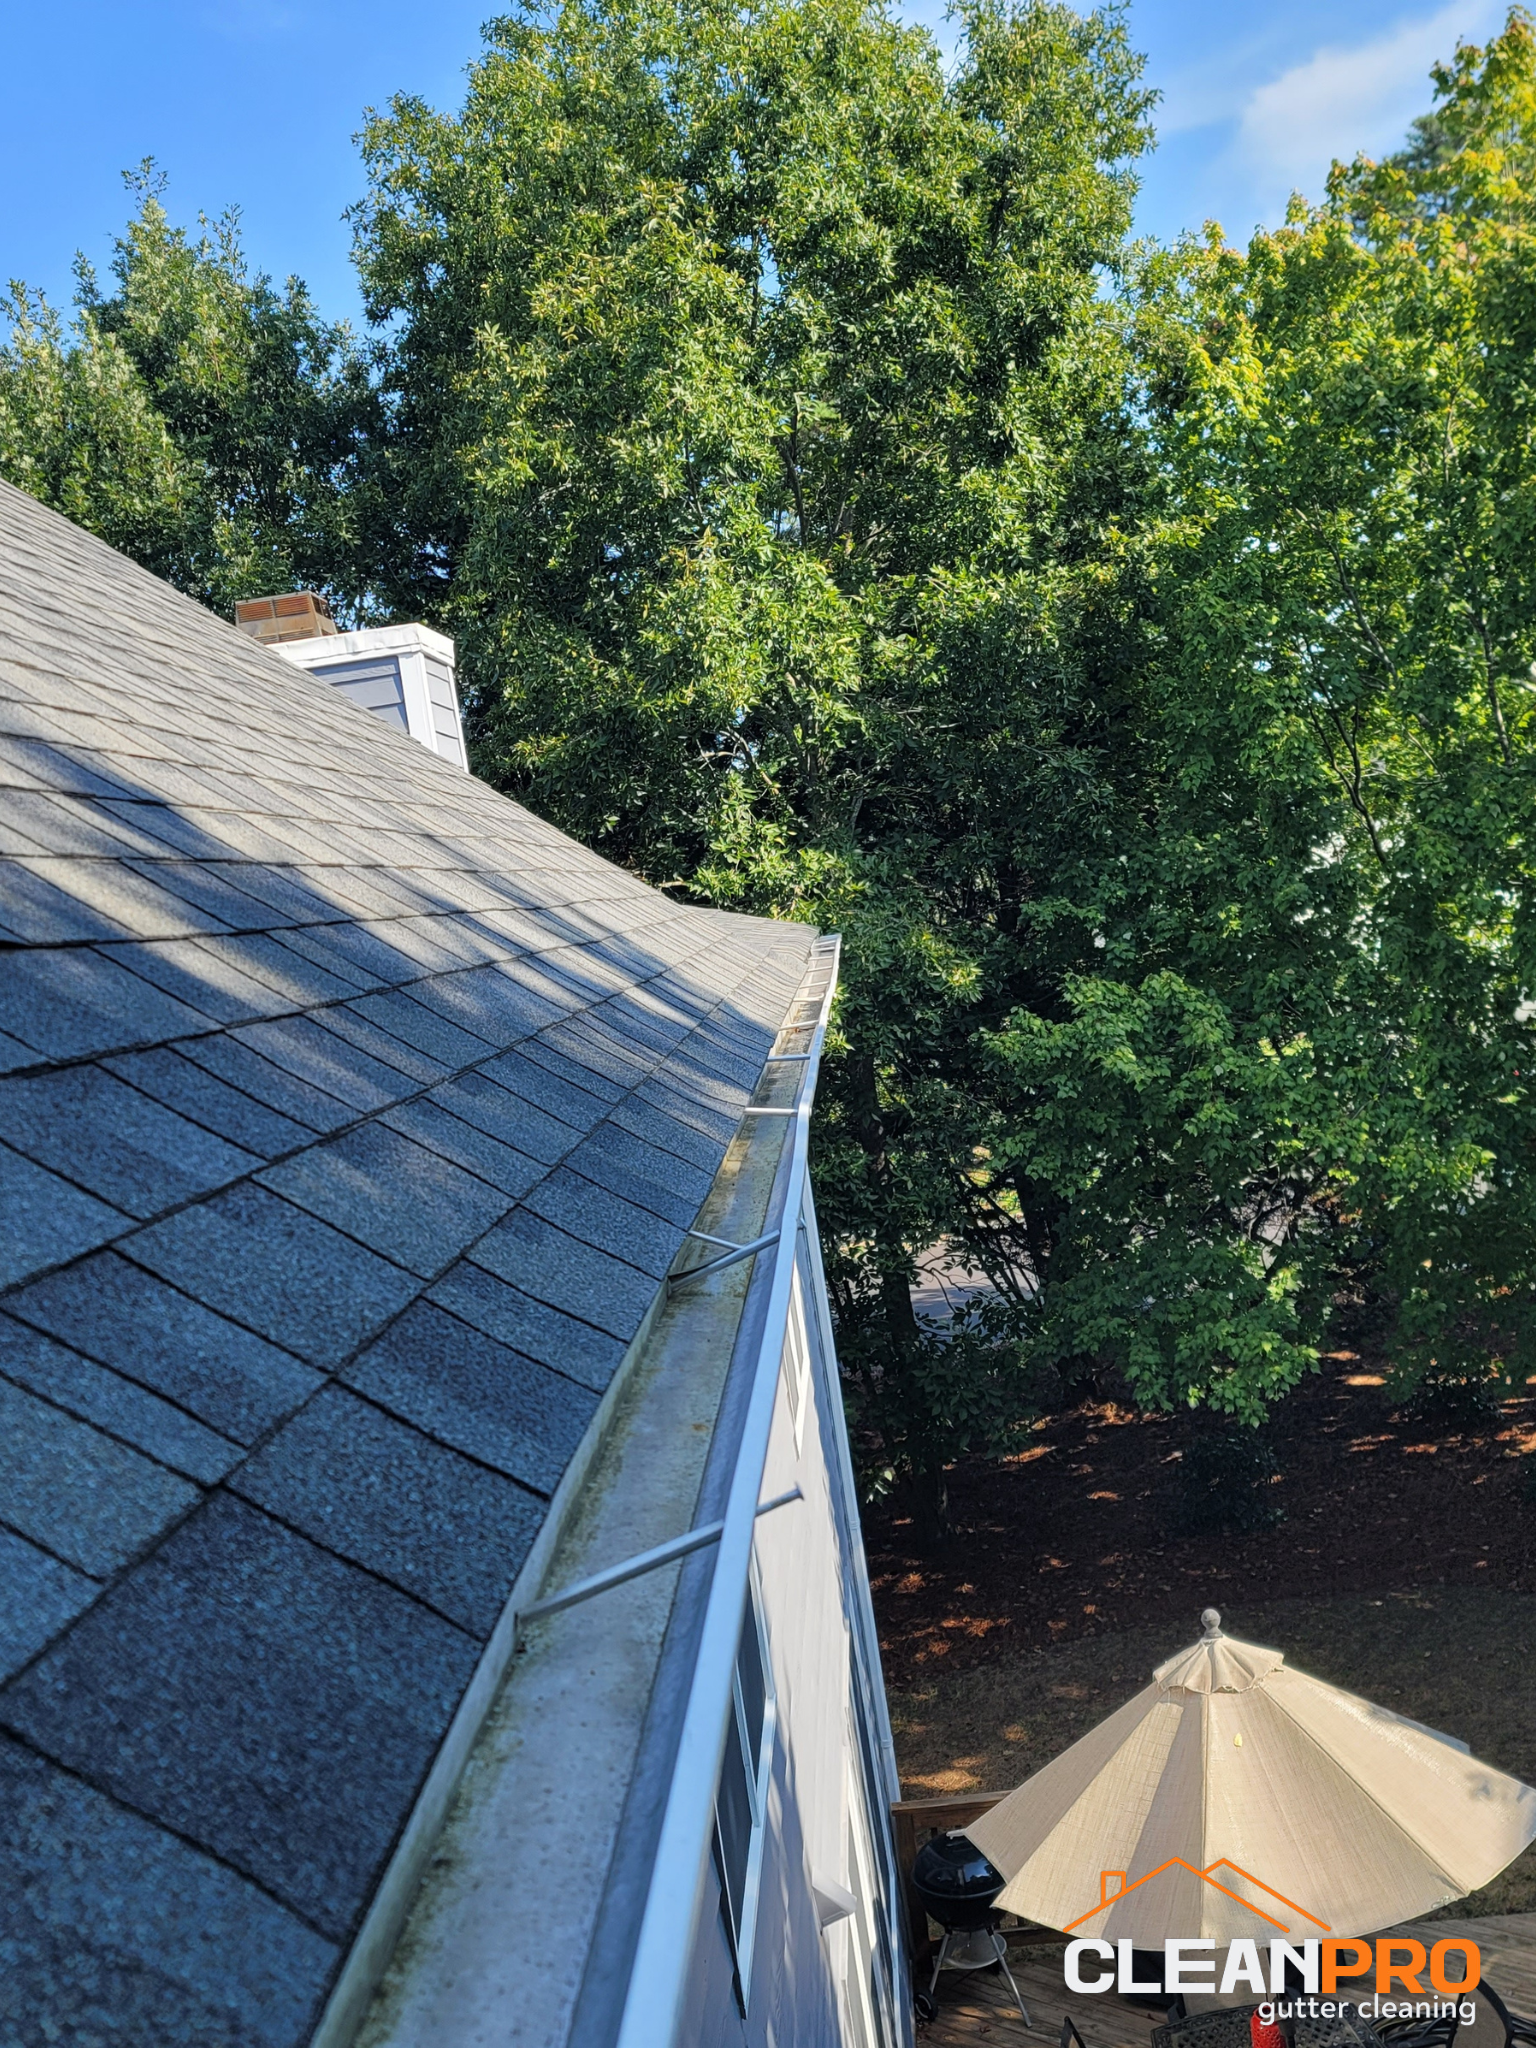 Top Notch Gutter Cleaning Service in New Orleans